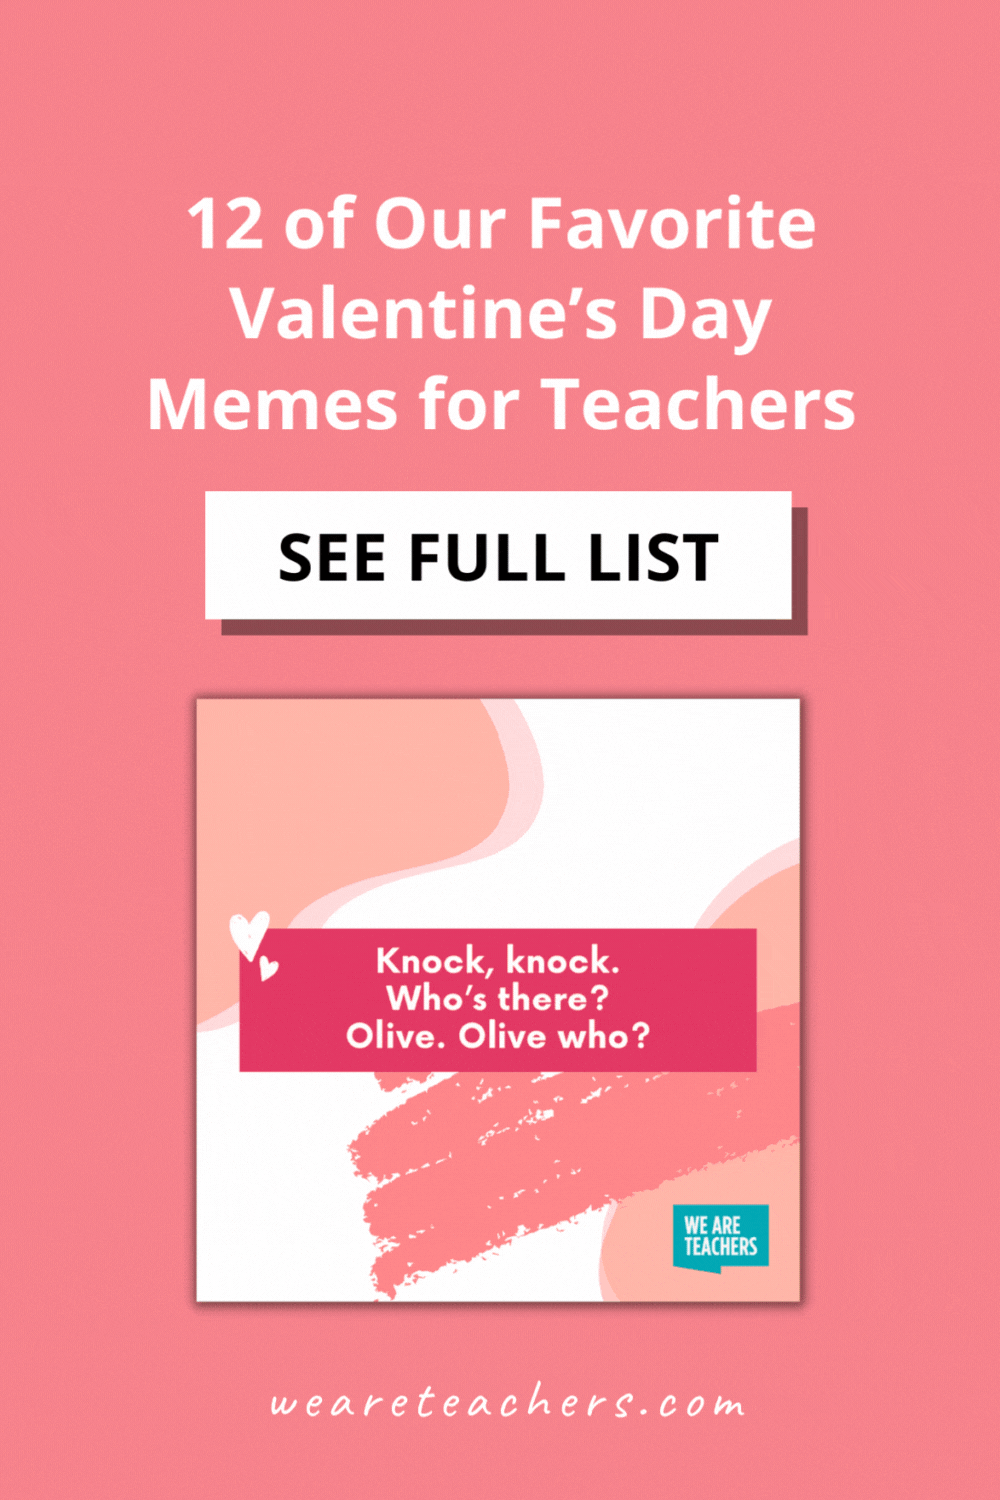 We hope scrolling through these Valentine's Day memes will help you chuckle and add a sense of relatability to this crazy day.